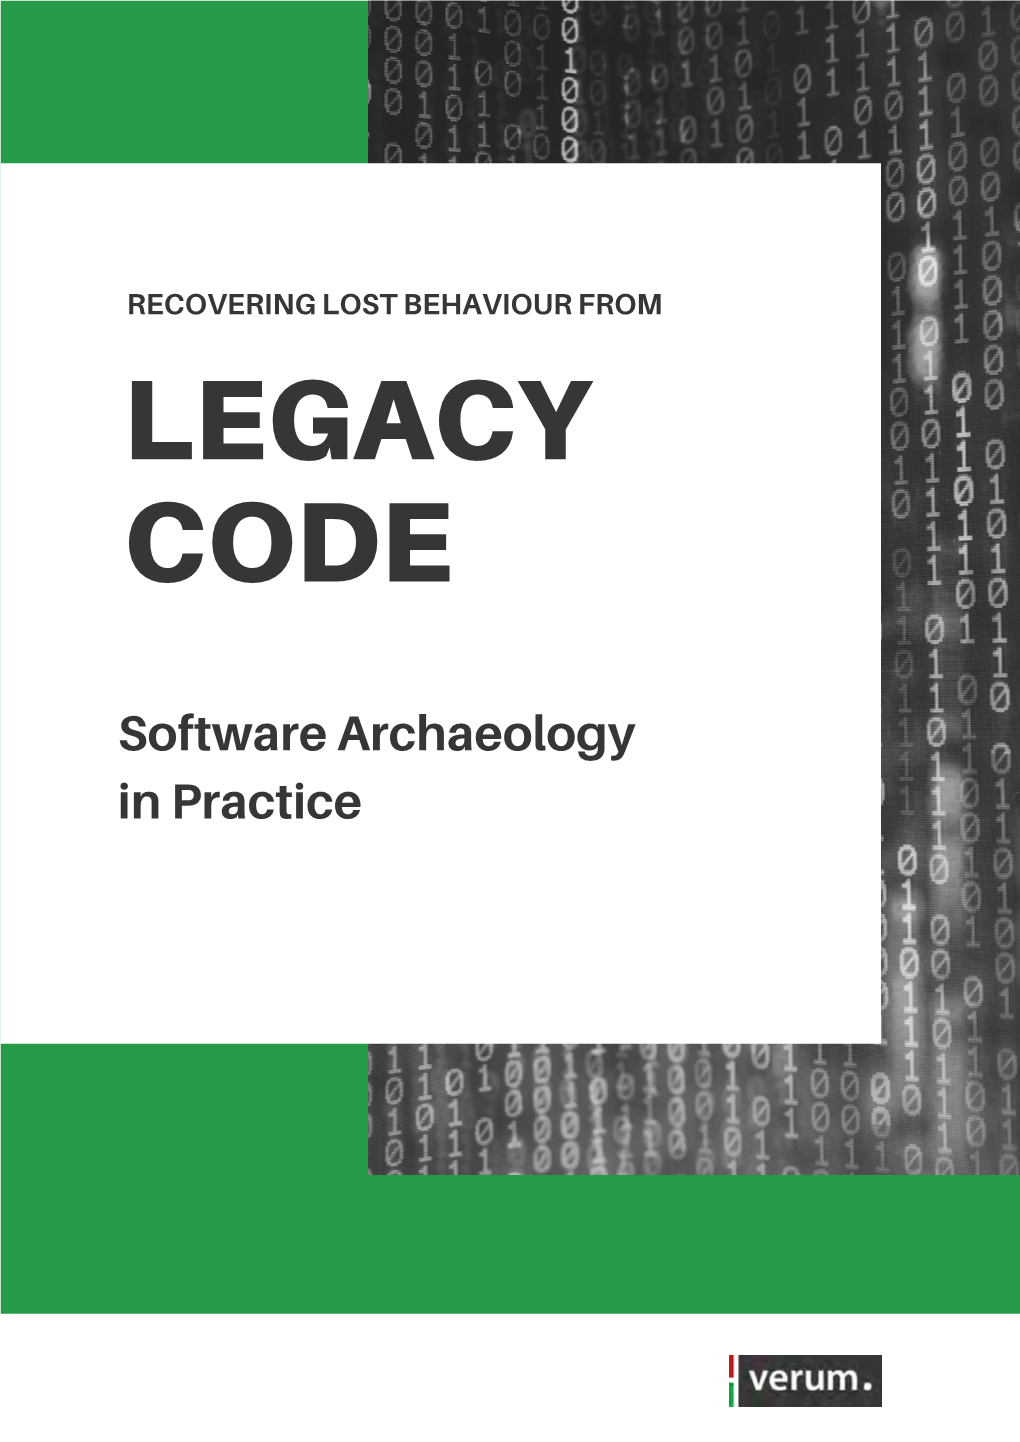 Software Archaeology in Practice Software Archaeology in Practice Recovering Lost Behaviour from Legacy Code